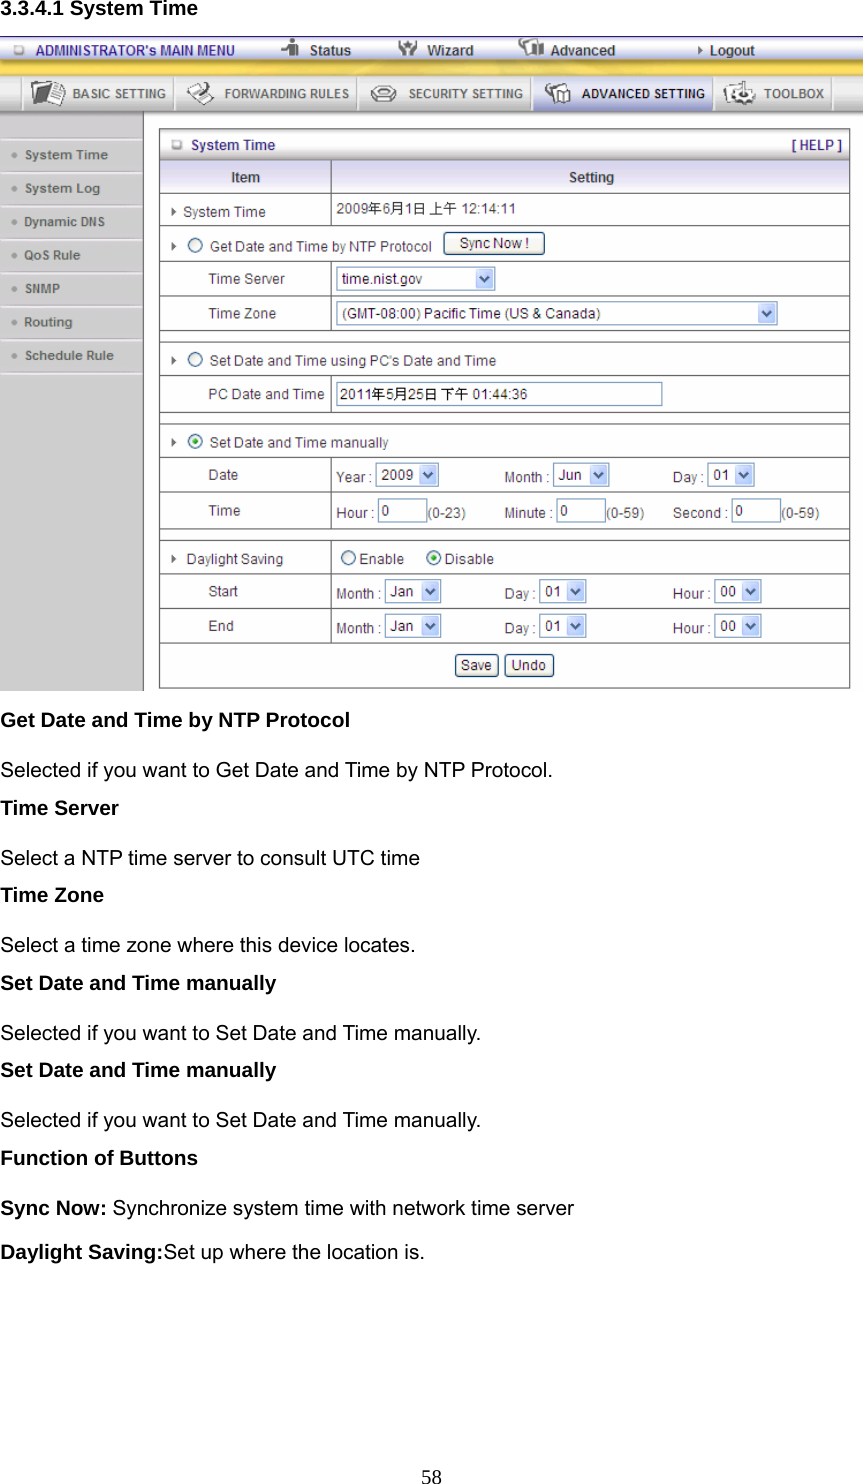  583.3.4.1 System Time  Get Date and Time by NTP Protocol Selected if you want to Get Date and Time by NTP Protocol.   Time Server Select a NTP time server to consult UTC time   Time Zone Select a time zone where this device locates.   Set Date and Time manually Selected if you want to Set Date and Time manually.   Set Date and Time manually Selected if you want to Set Date and Time manually. Function of Buttons Sync Now: Synchronize system time with network time server Daylight Saving:Set up where the location is. 